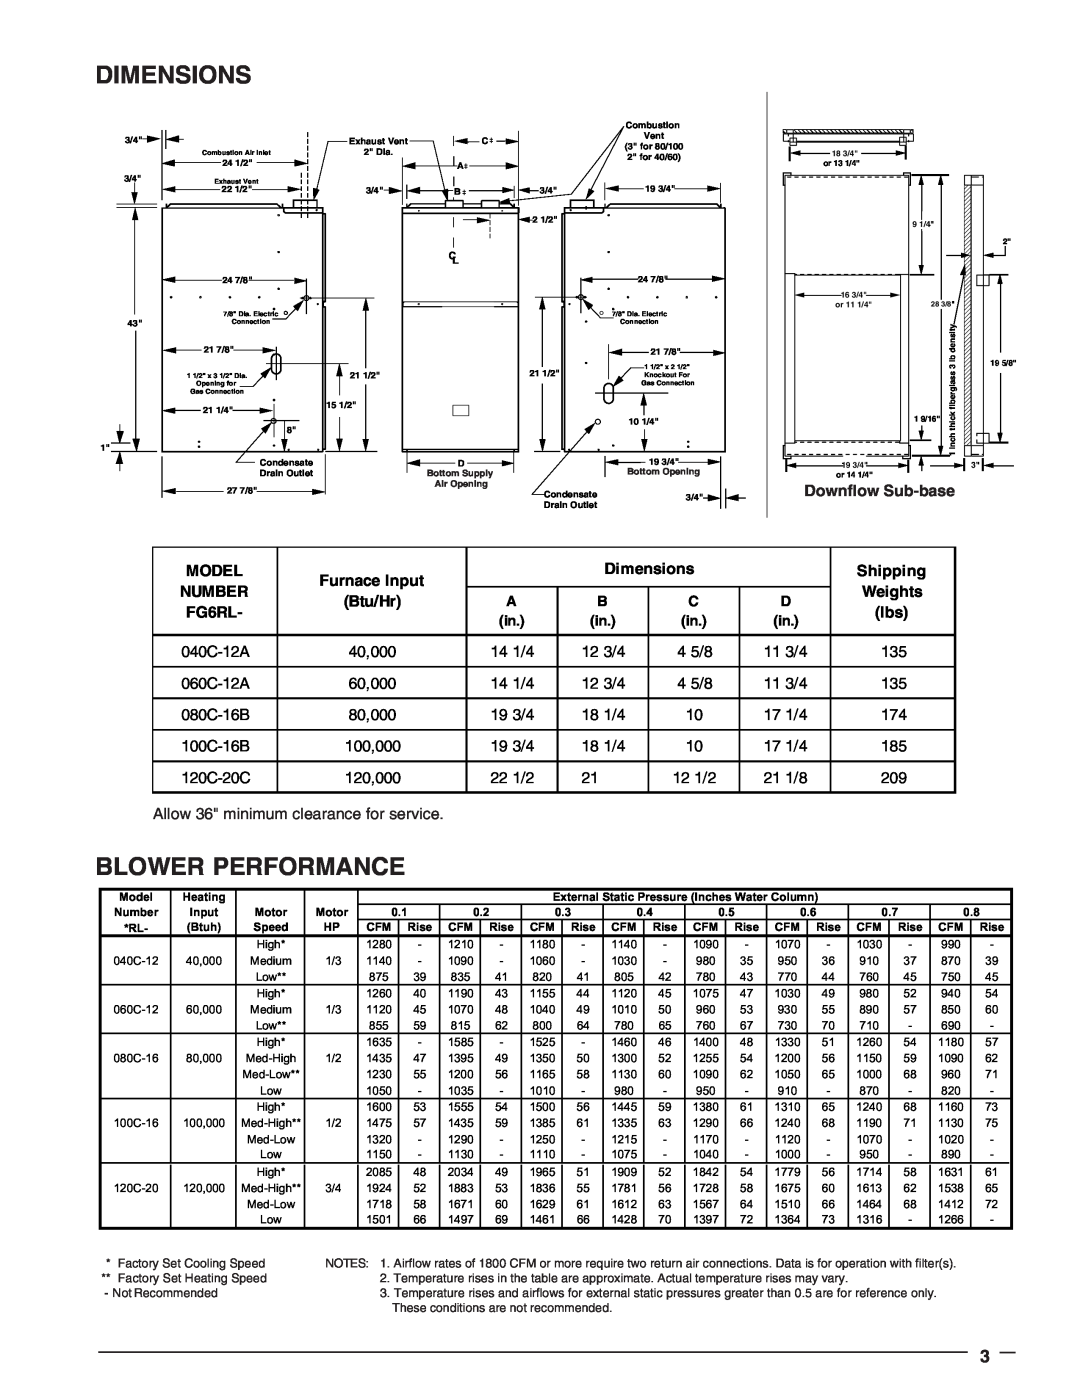 Westinghouse FG6RL technical specifications Dimensions, Blower Performance, Model, Furnace Input, Shipping, Number, Btu/Hr 